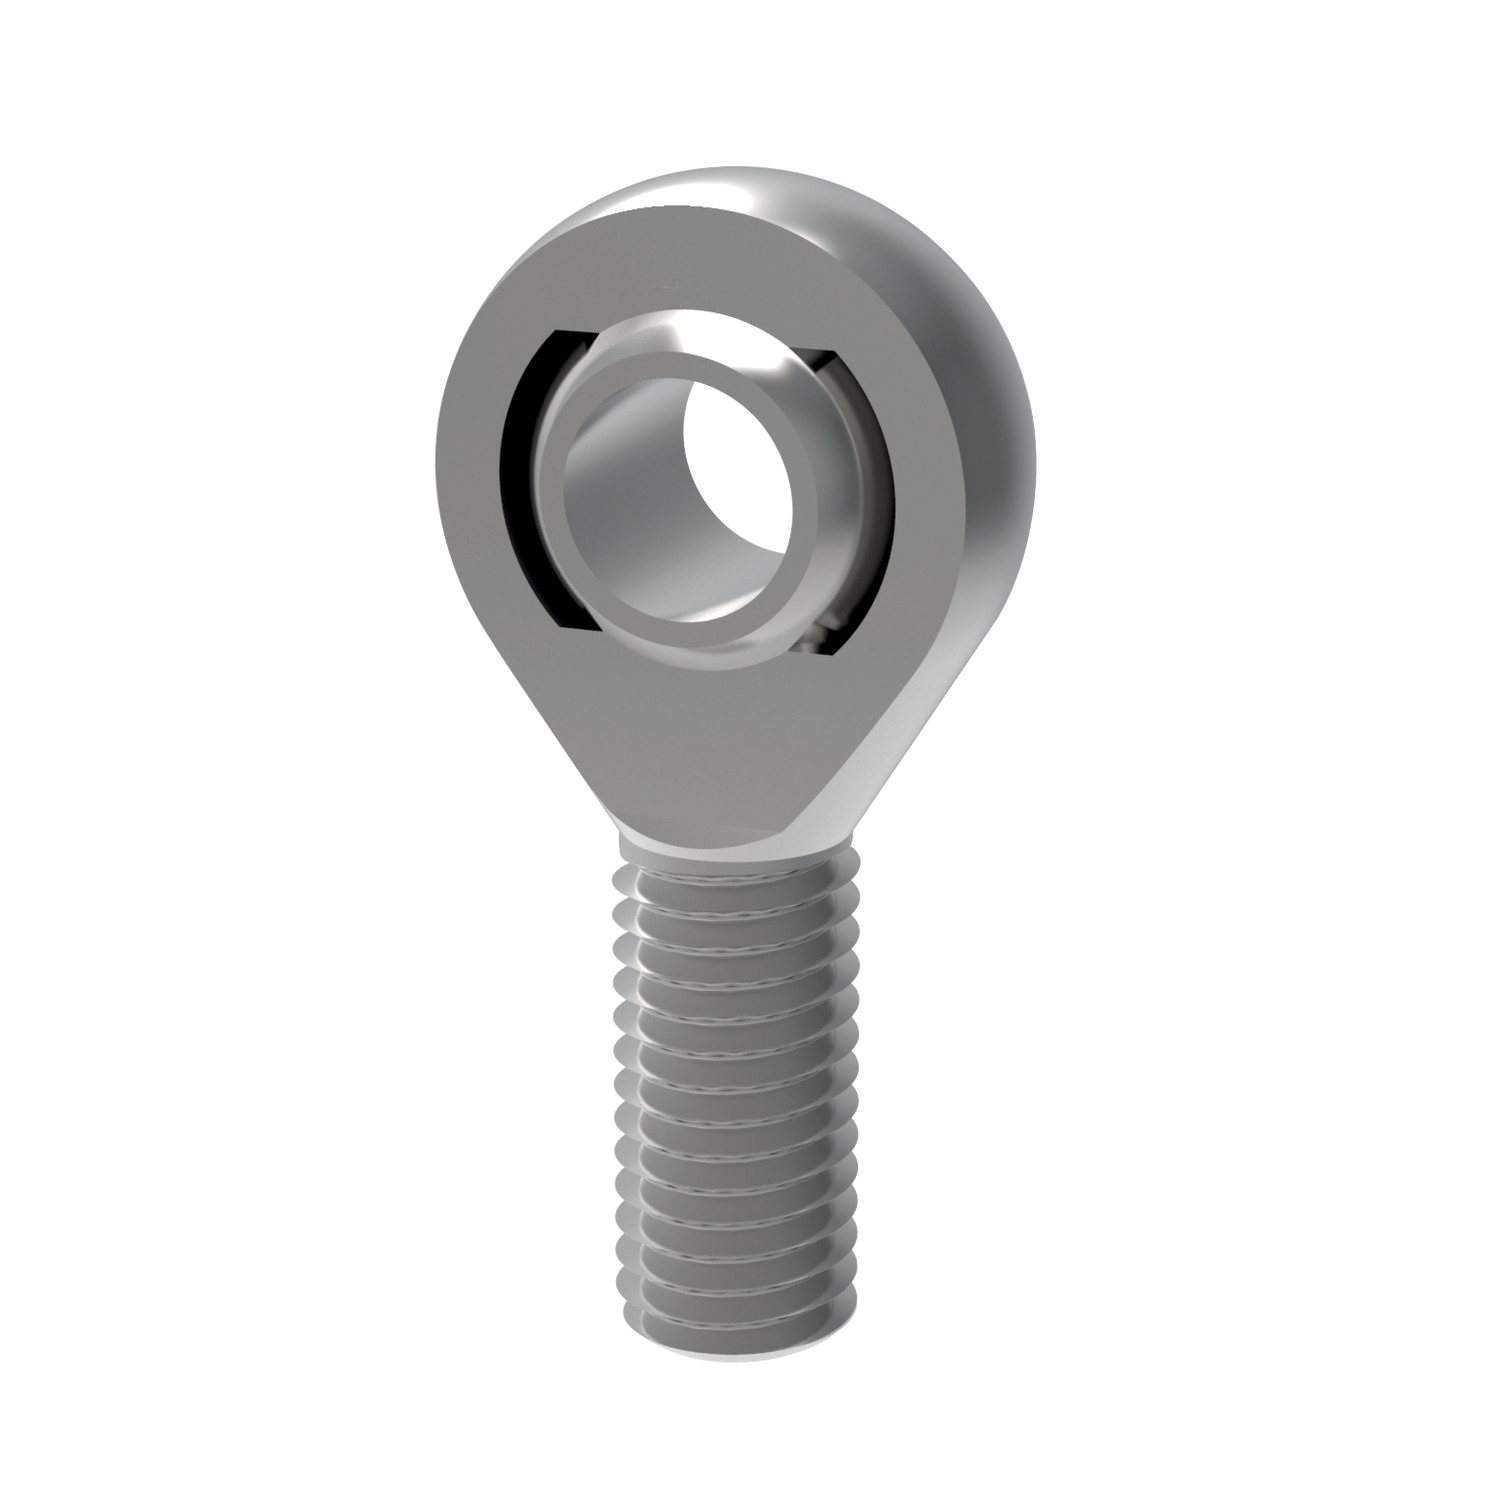 Rod Ends - Heavy Duty - Male These heavy duty rod ends are maded from galvanised forged steel. Little to no maintainence required with fine pitch threads. Spherical plain and intergrall ball bearing versions available.